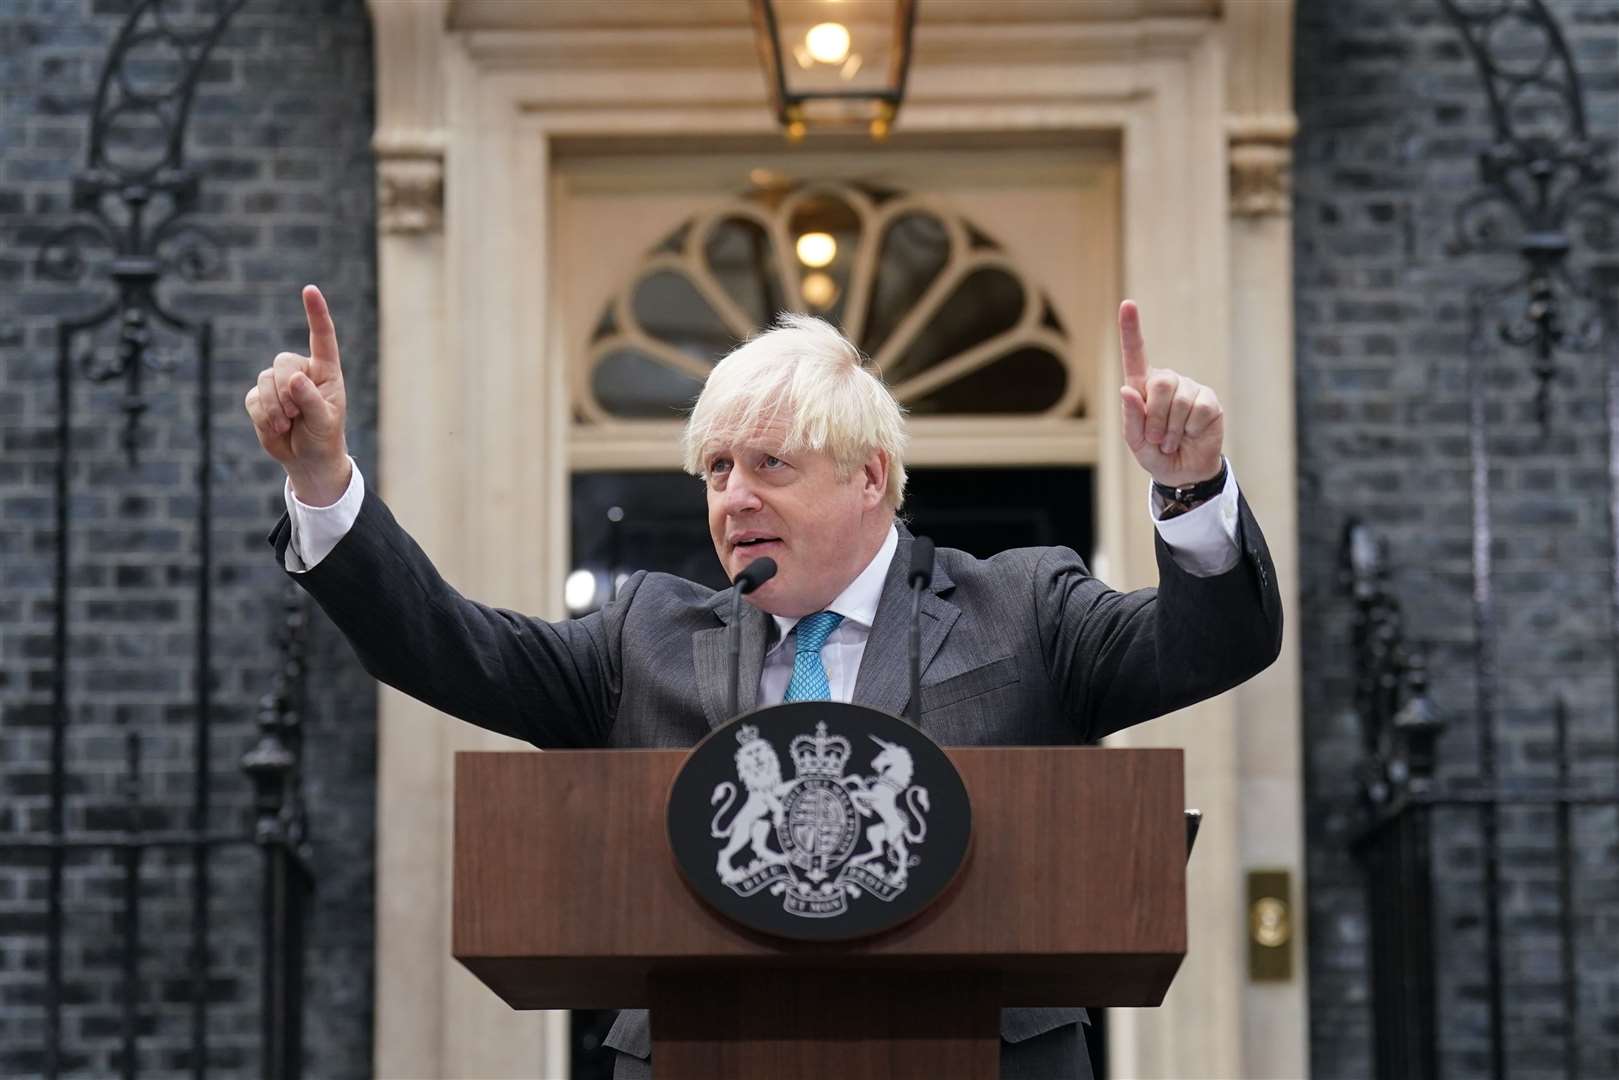 Boris Johnson makes a speech outside 10 Downing Street on September 6 before leaving for Balmoral for an audience with the Queen to formally resign as prime minister (Stefan Rousseau/PA)